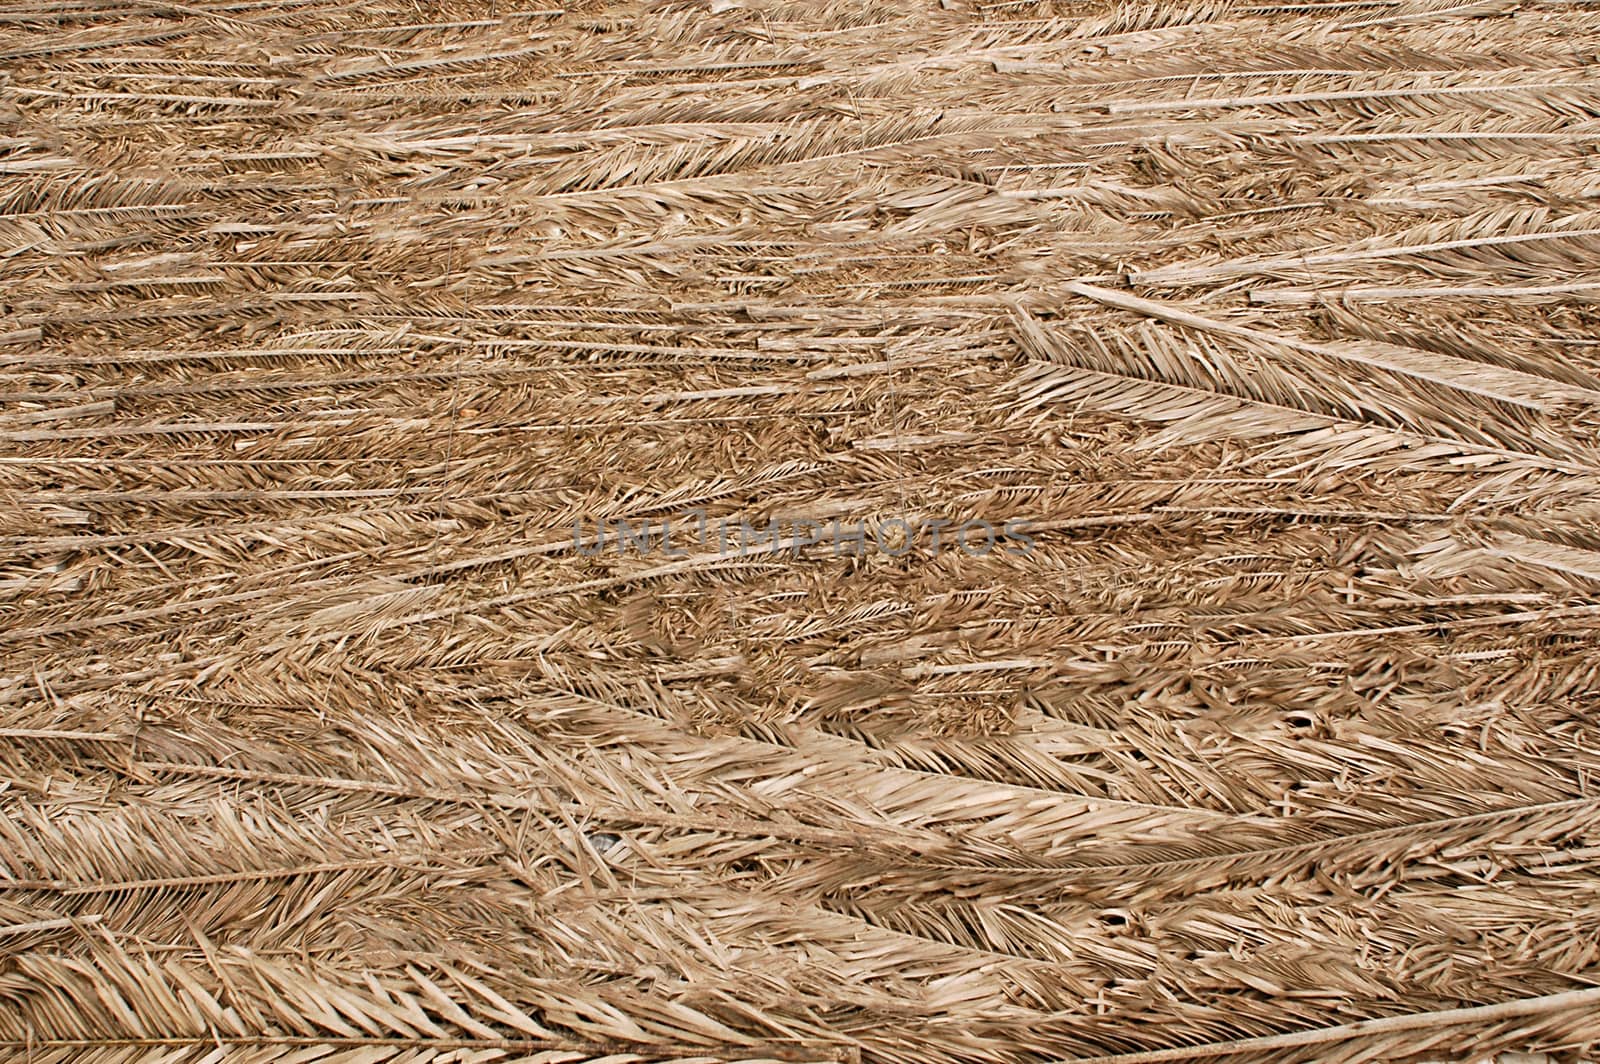 Dried palm branches of coffee color spread out with each other .Texture or background.